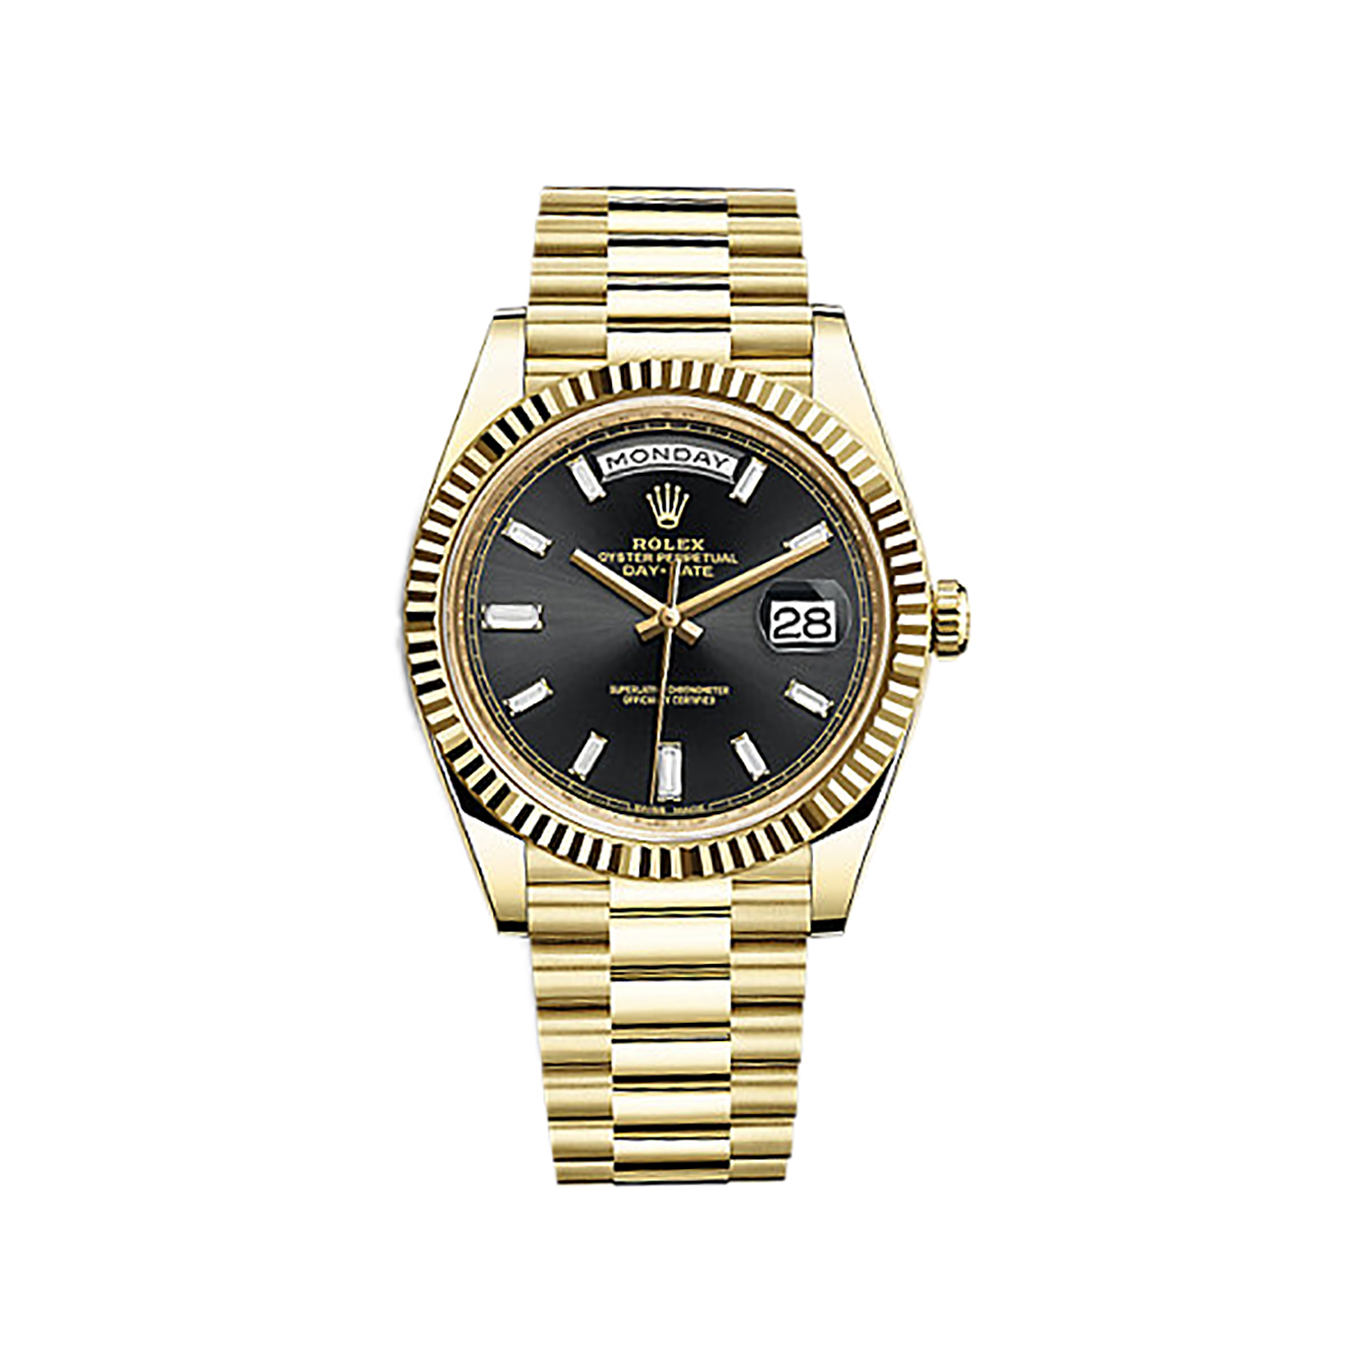 Day-Date 40 228238 Gold Watch (Black Set with Diamonds)